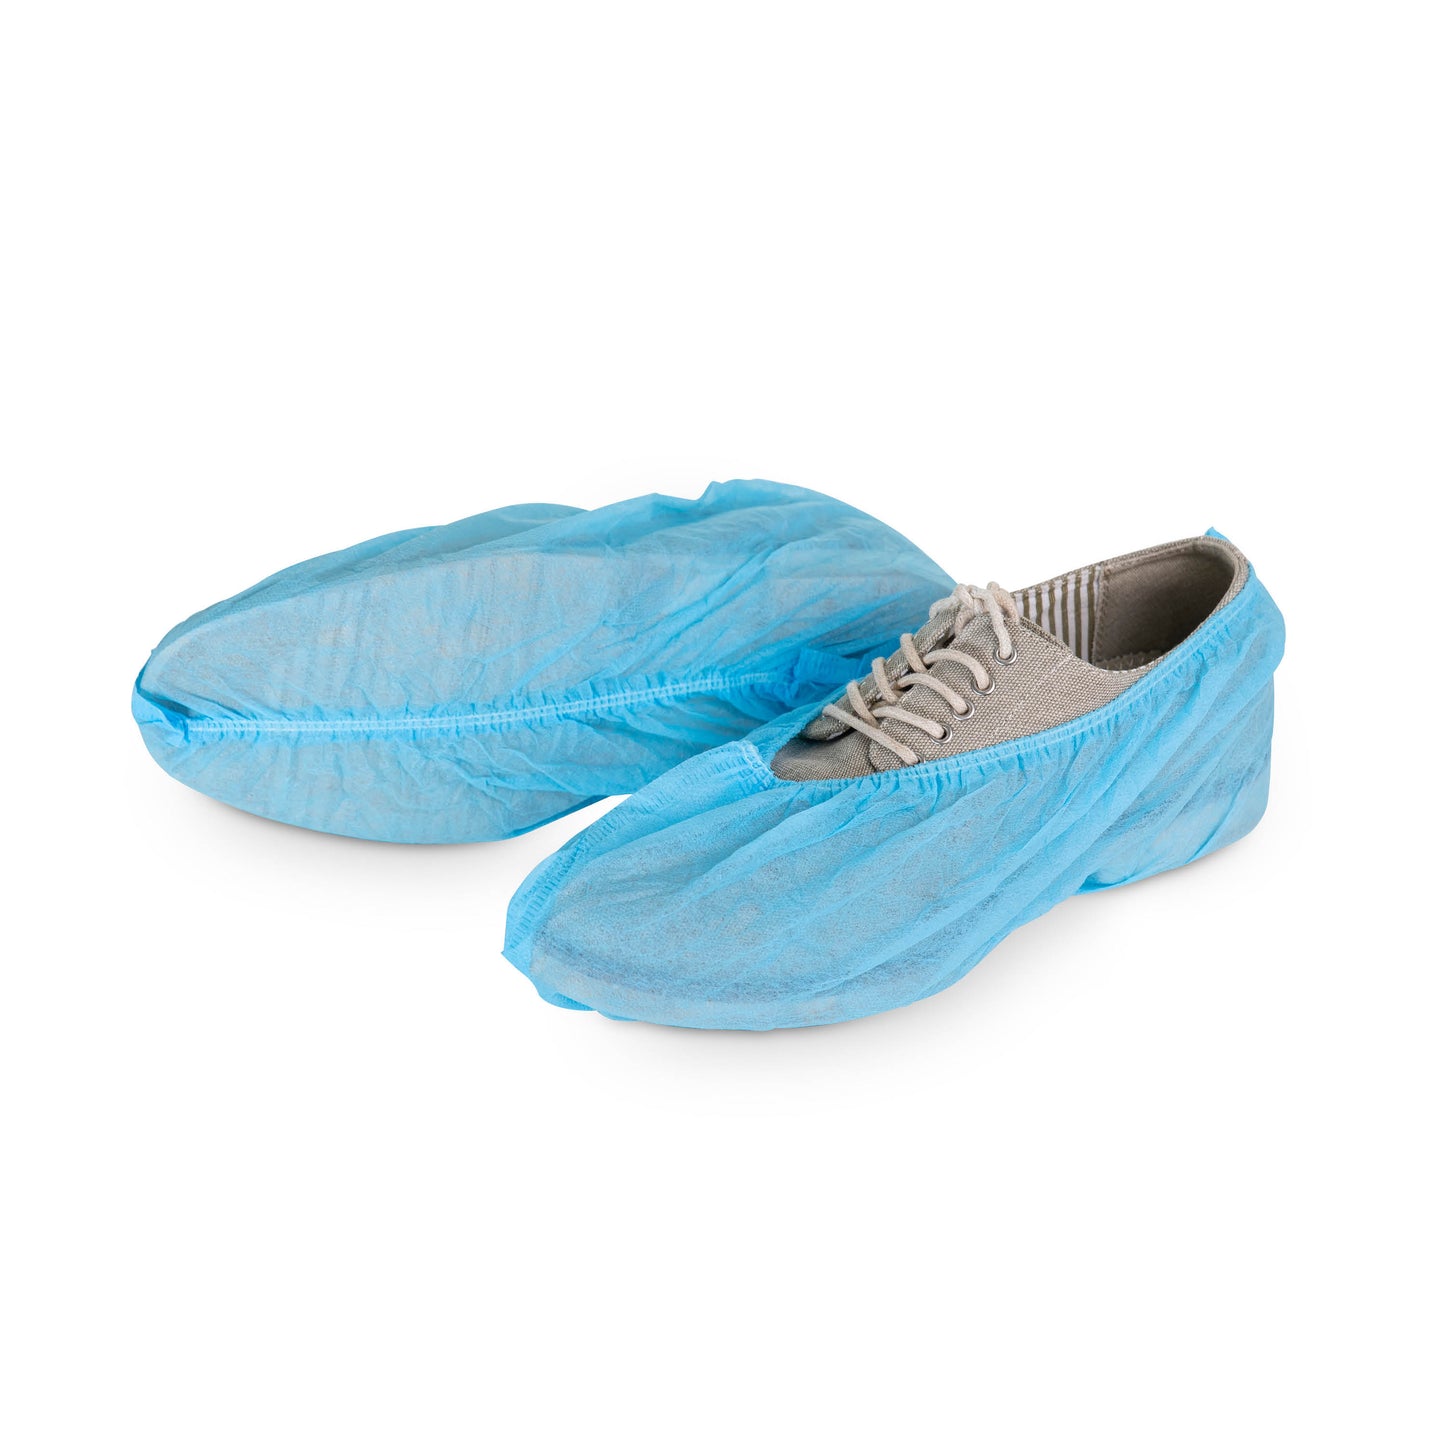 Standard Shoe Covers, One Size Fits Most